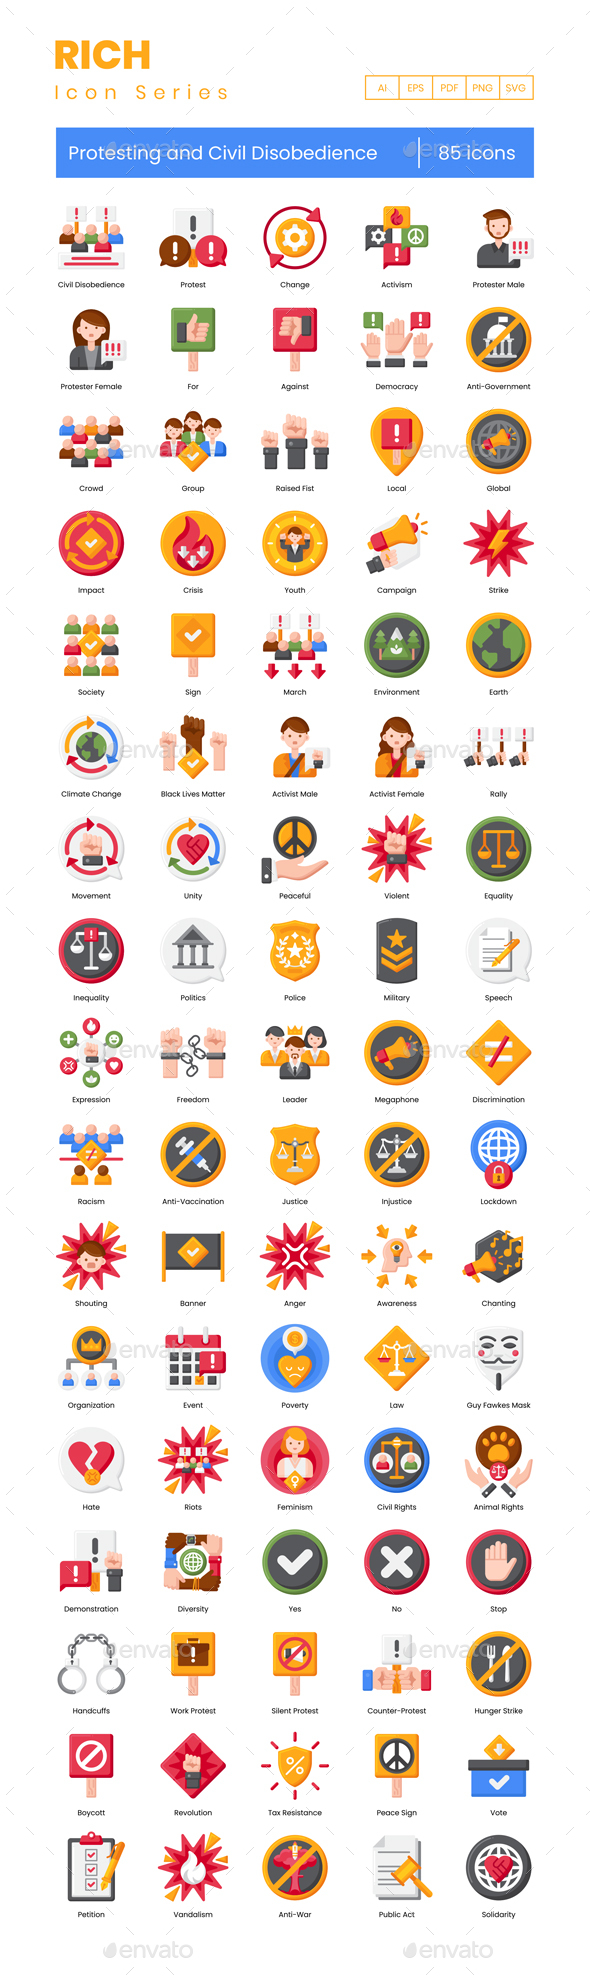 85 Protesting and Civil Disobedience Icons | Rich Series